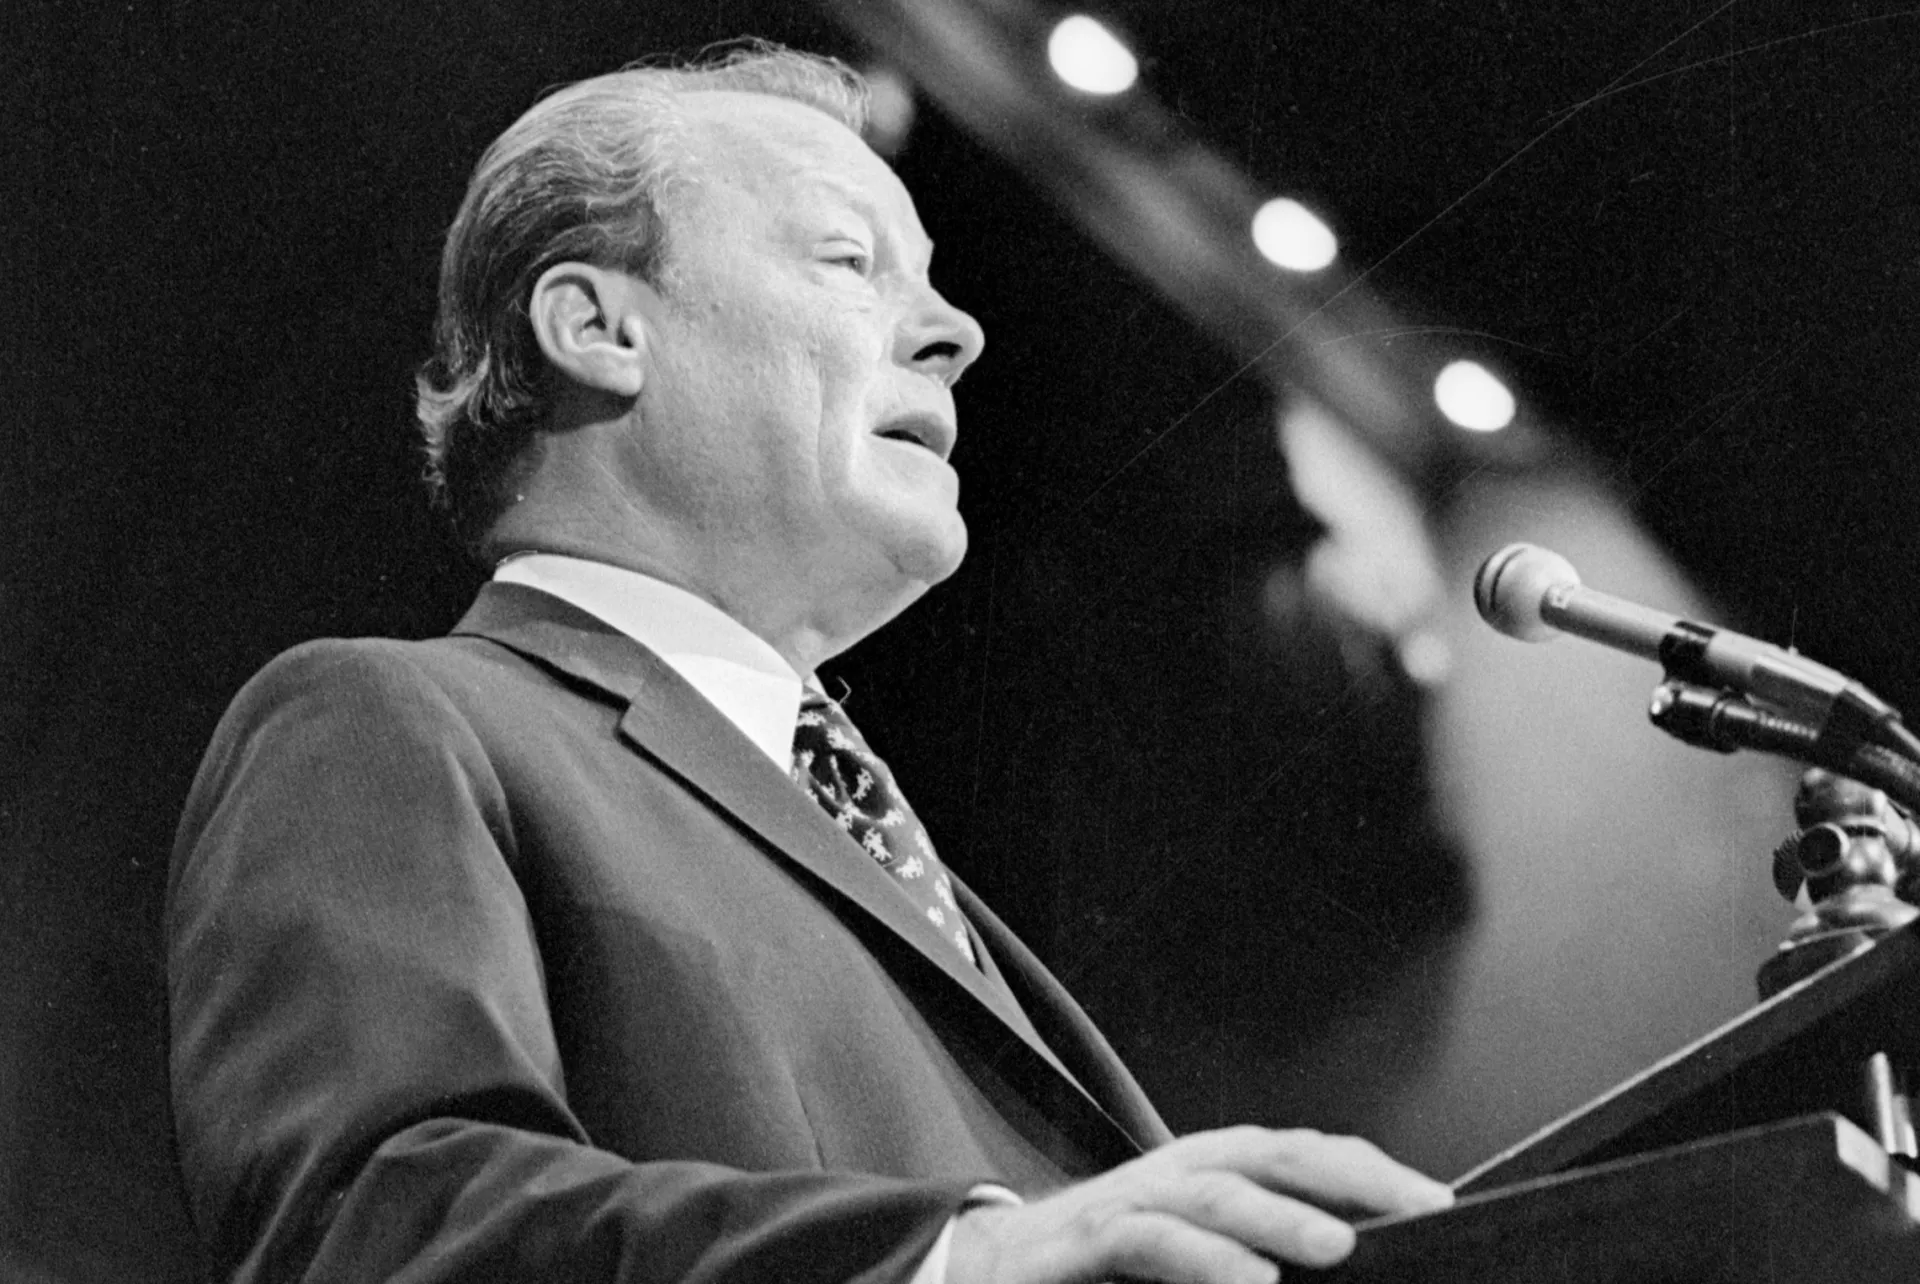 Willy Brandt at GMF founding at Harvard University in 1972